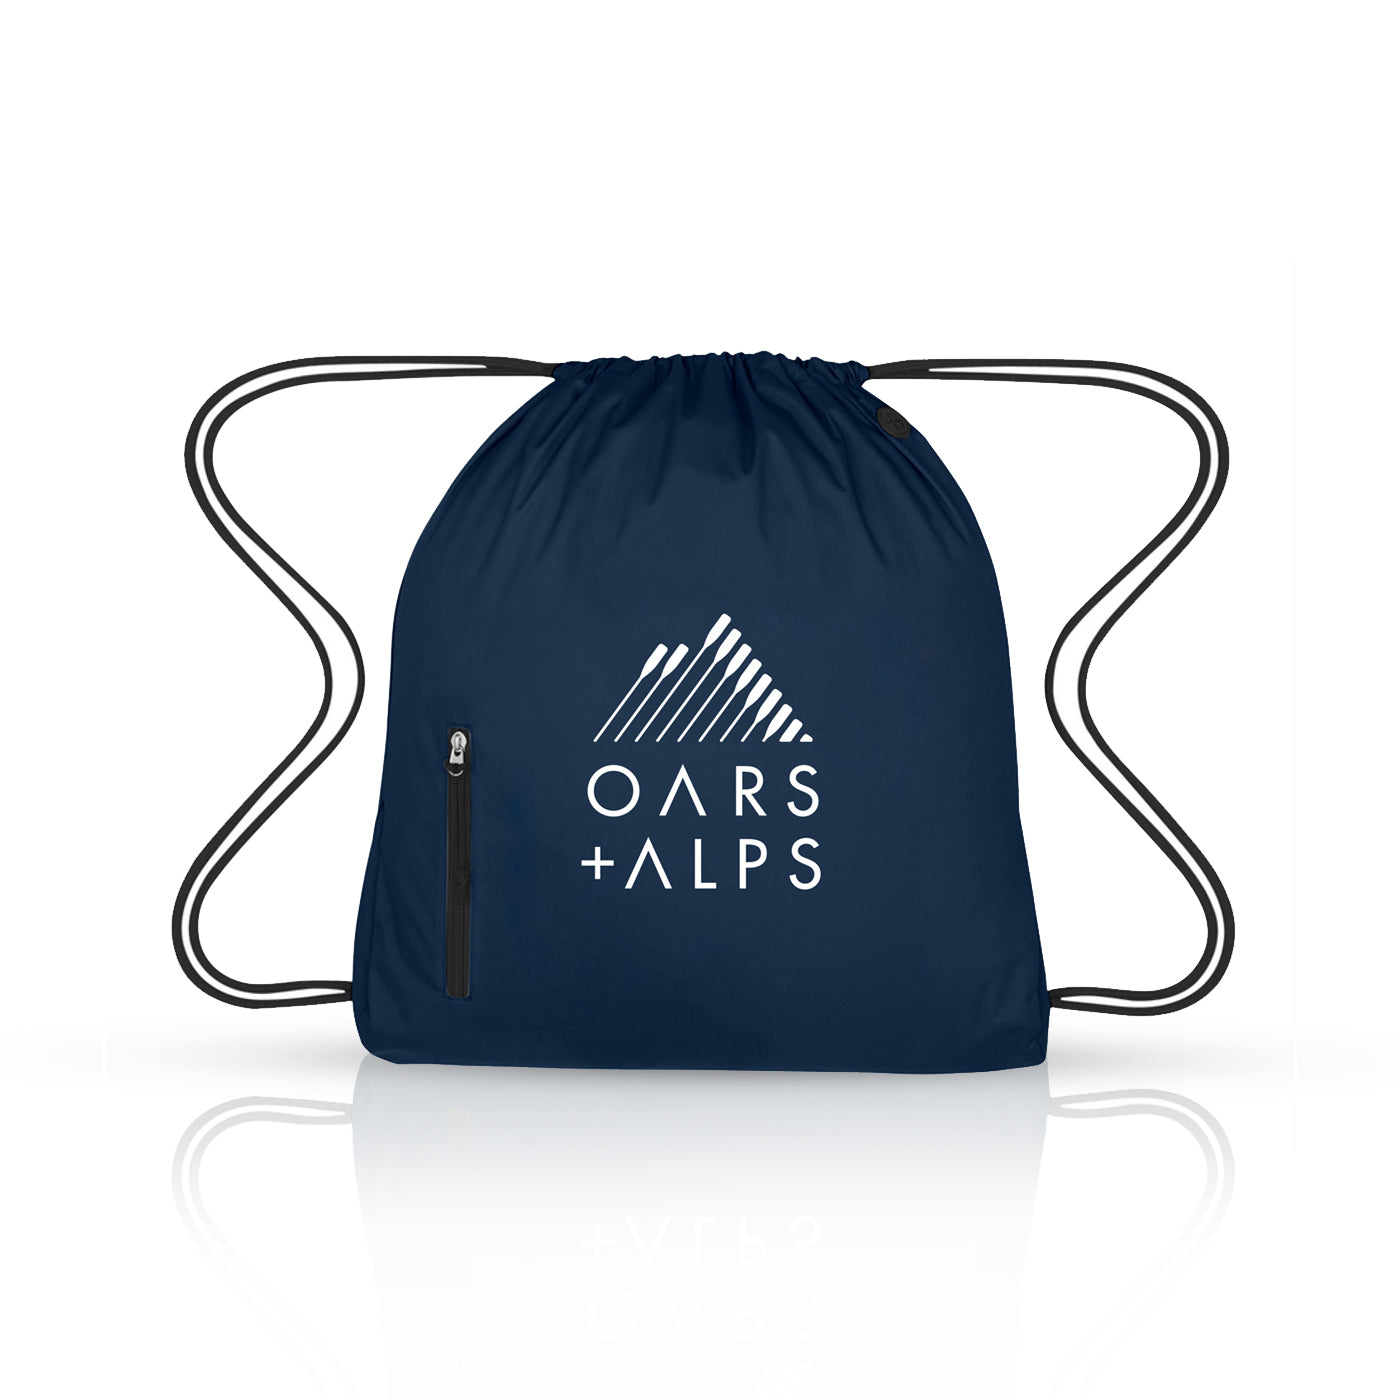 oars and alps drawstring bag